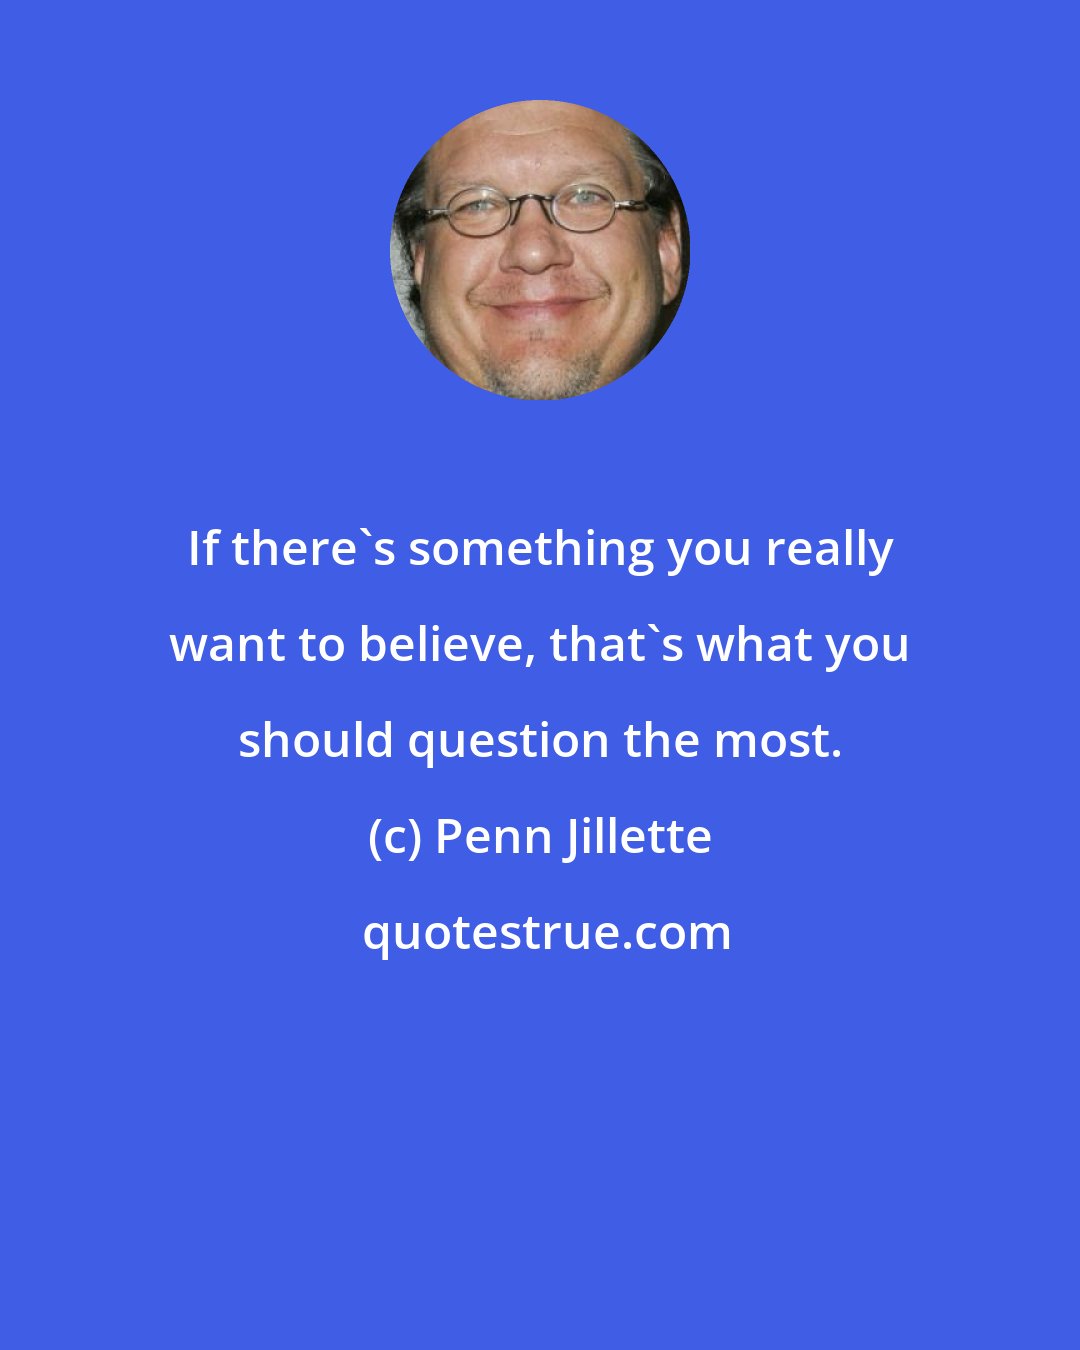 Penn Jillette: If there's something you really want to believe, that's what you should question the most.